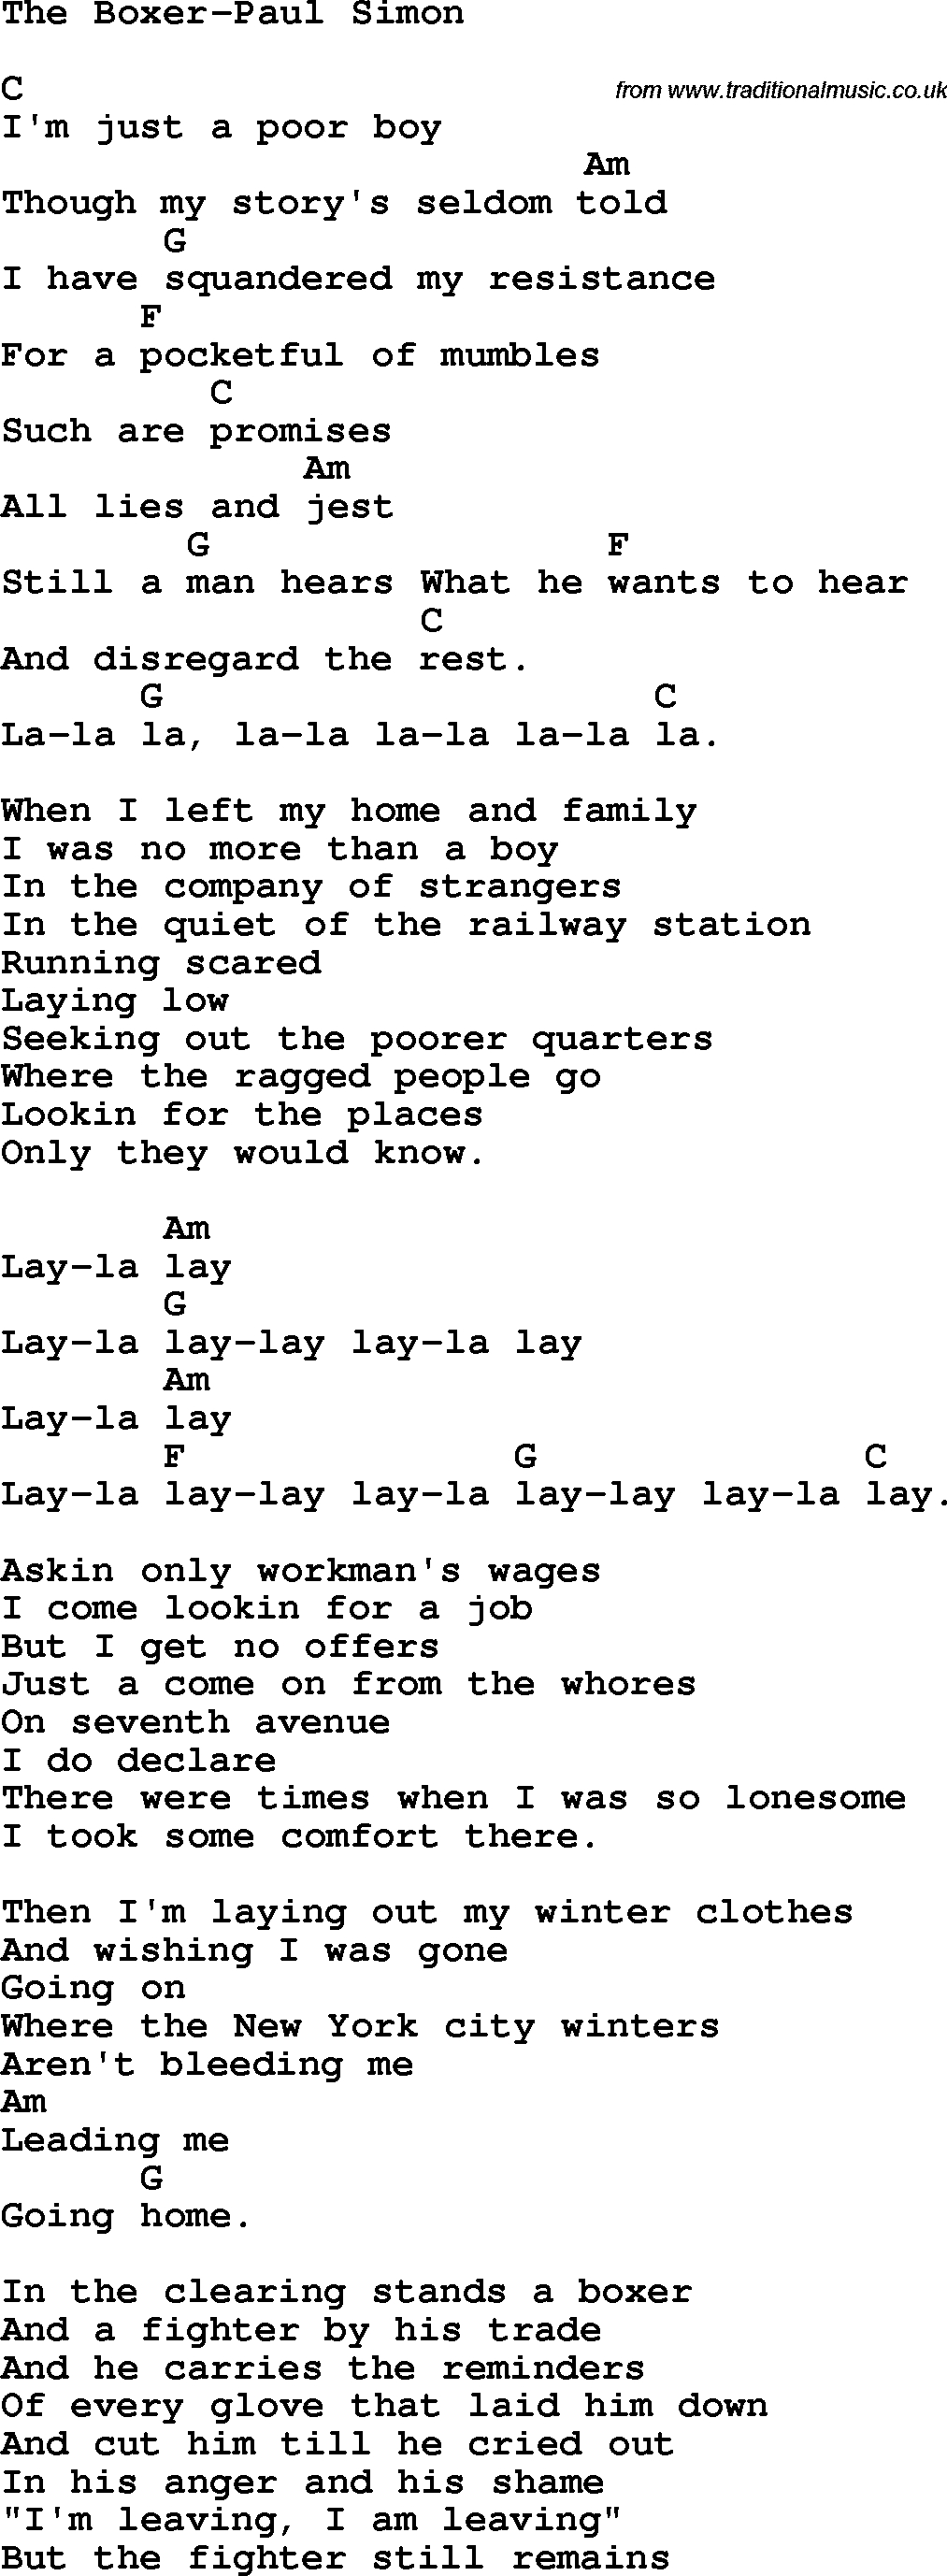 The Boxer Chords Protest Song The Boxer Paul Simon Lyrics And Chords